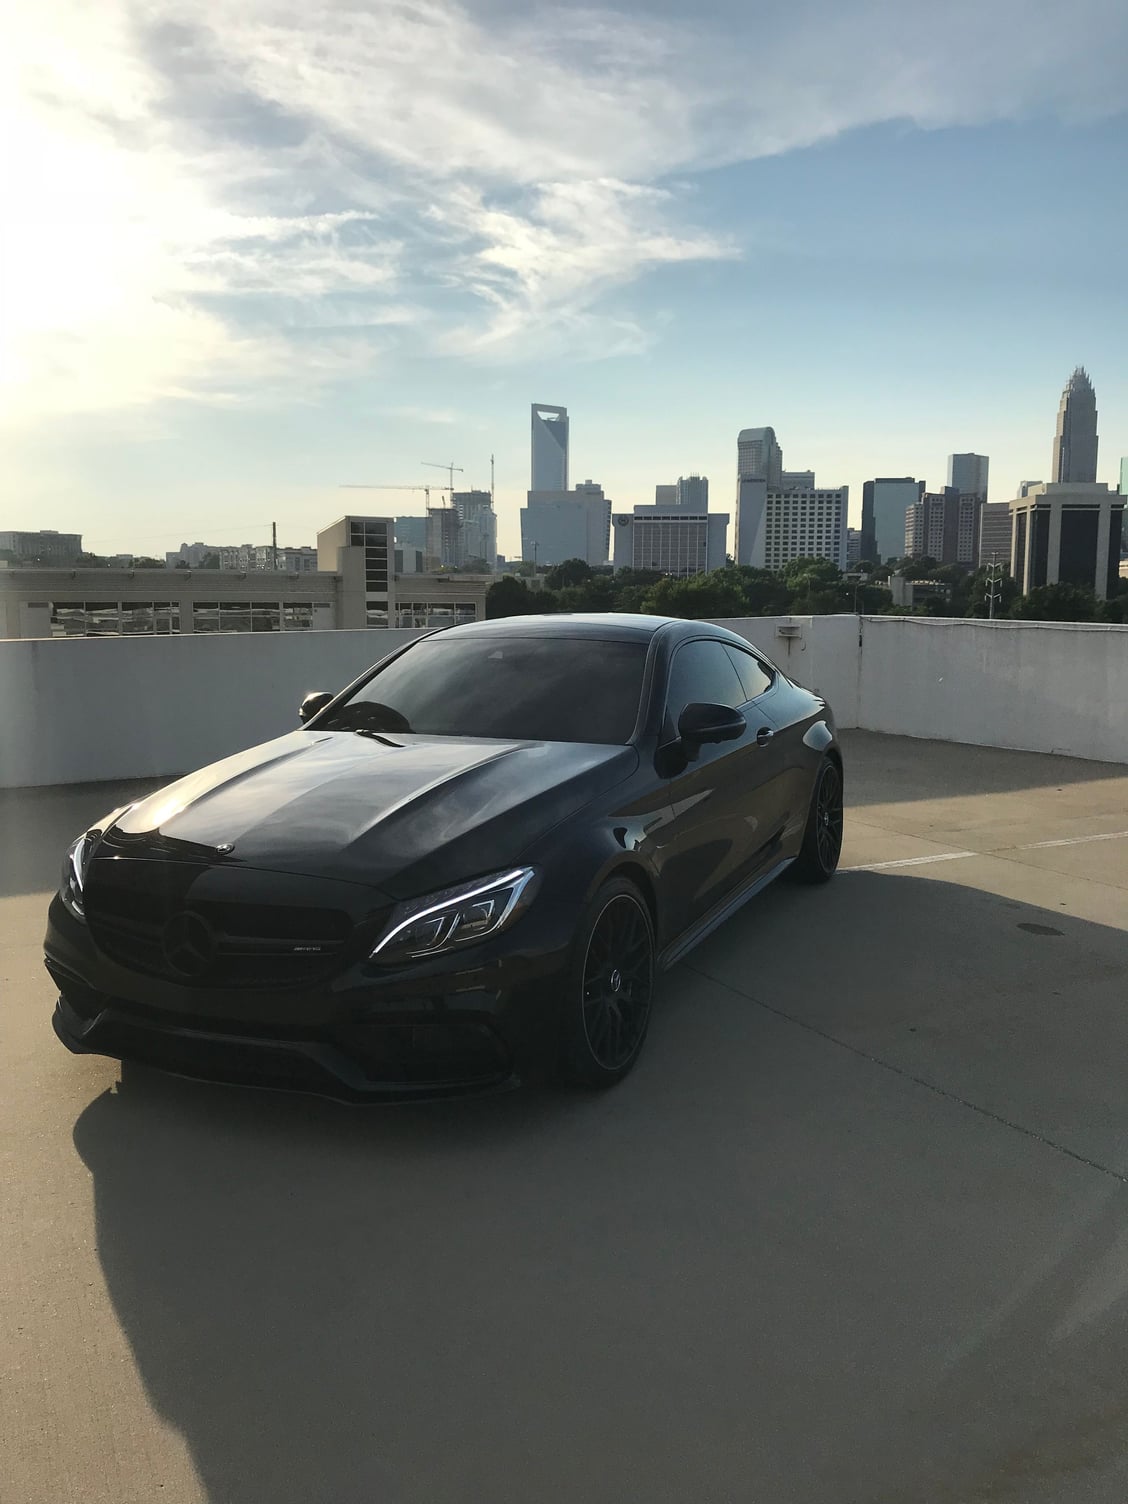 18 Mercedes Benz C Class C 63 S Amg Coupe Obsidian Black Mbworld Org Forums